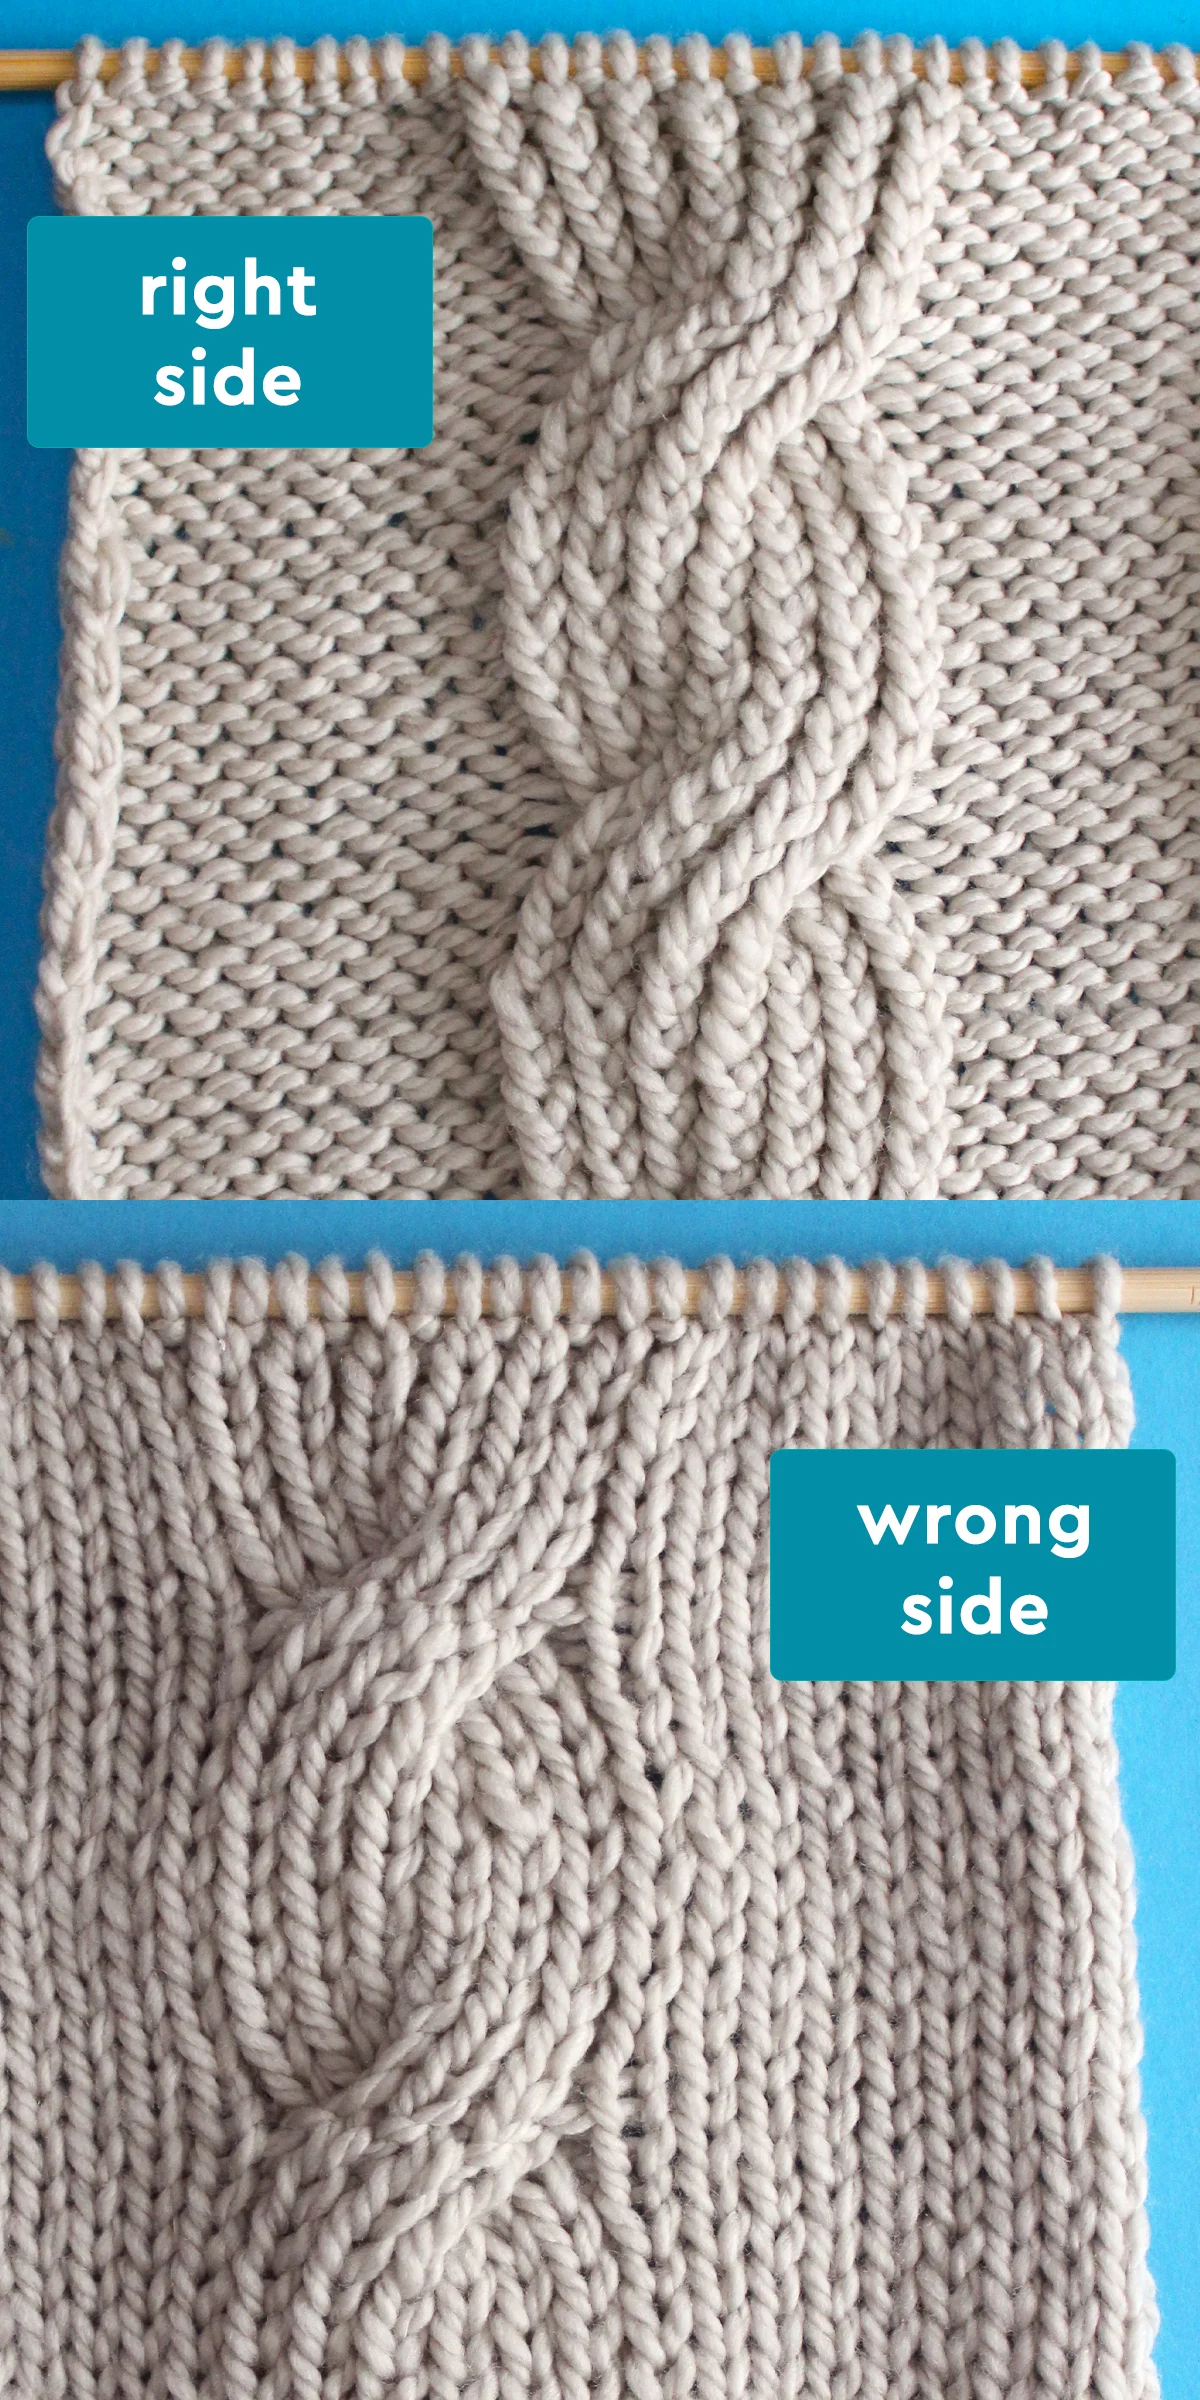 Right and wrong sides of the Seven Seas Cable knit stitch pattern in beige colored yarn.